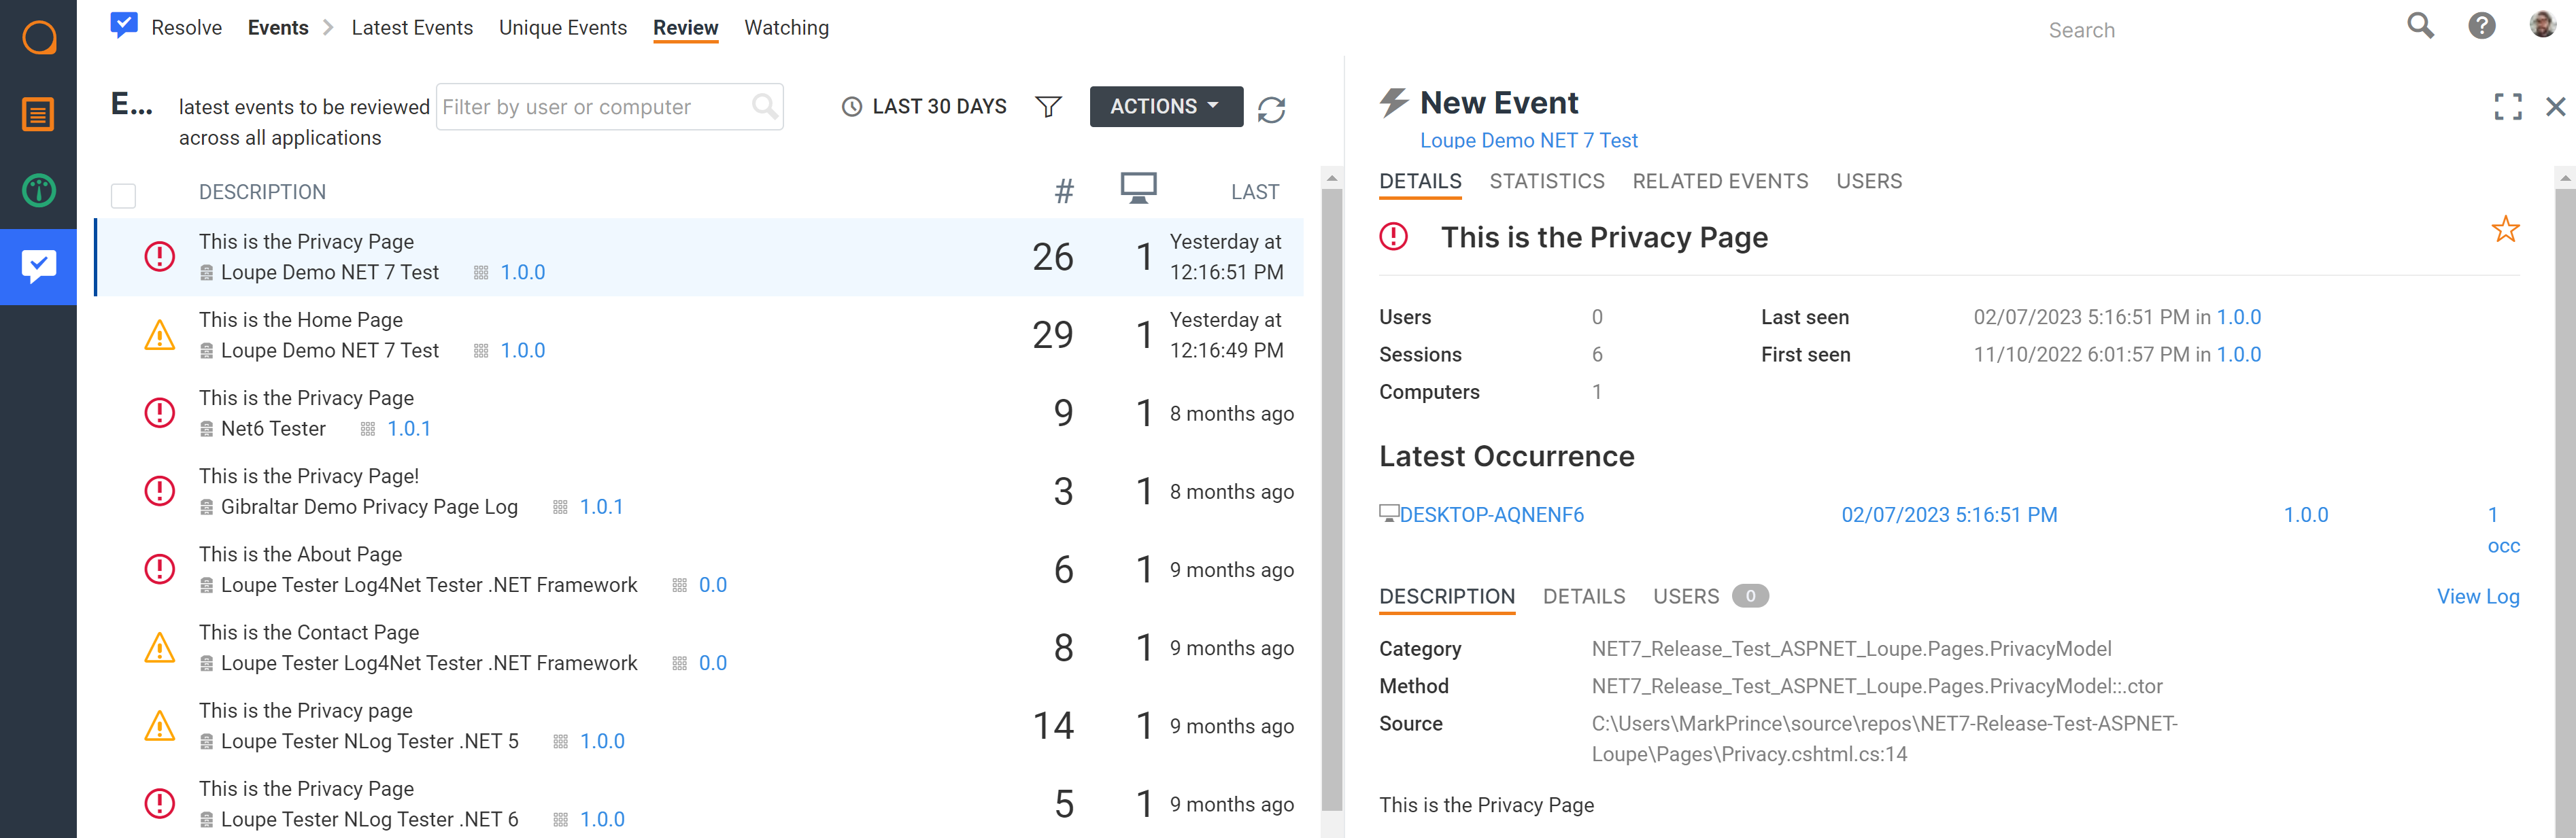 Screenshot of the events list showing events across my applications, focused on a new event